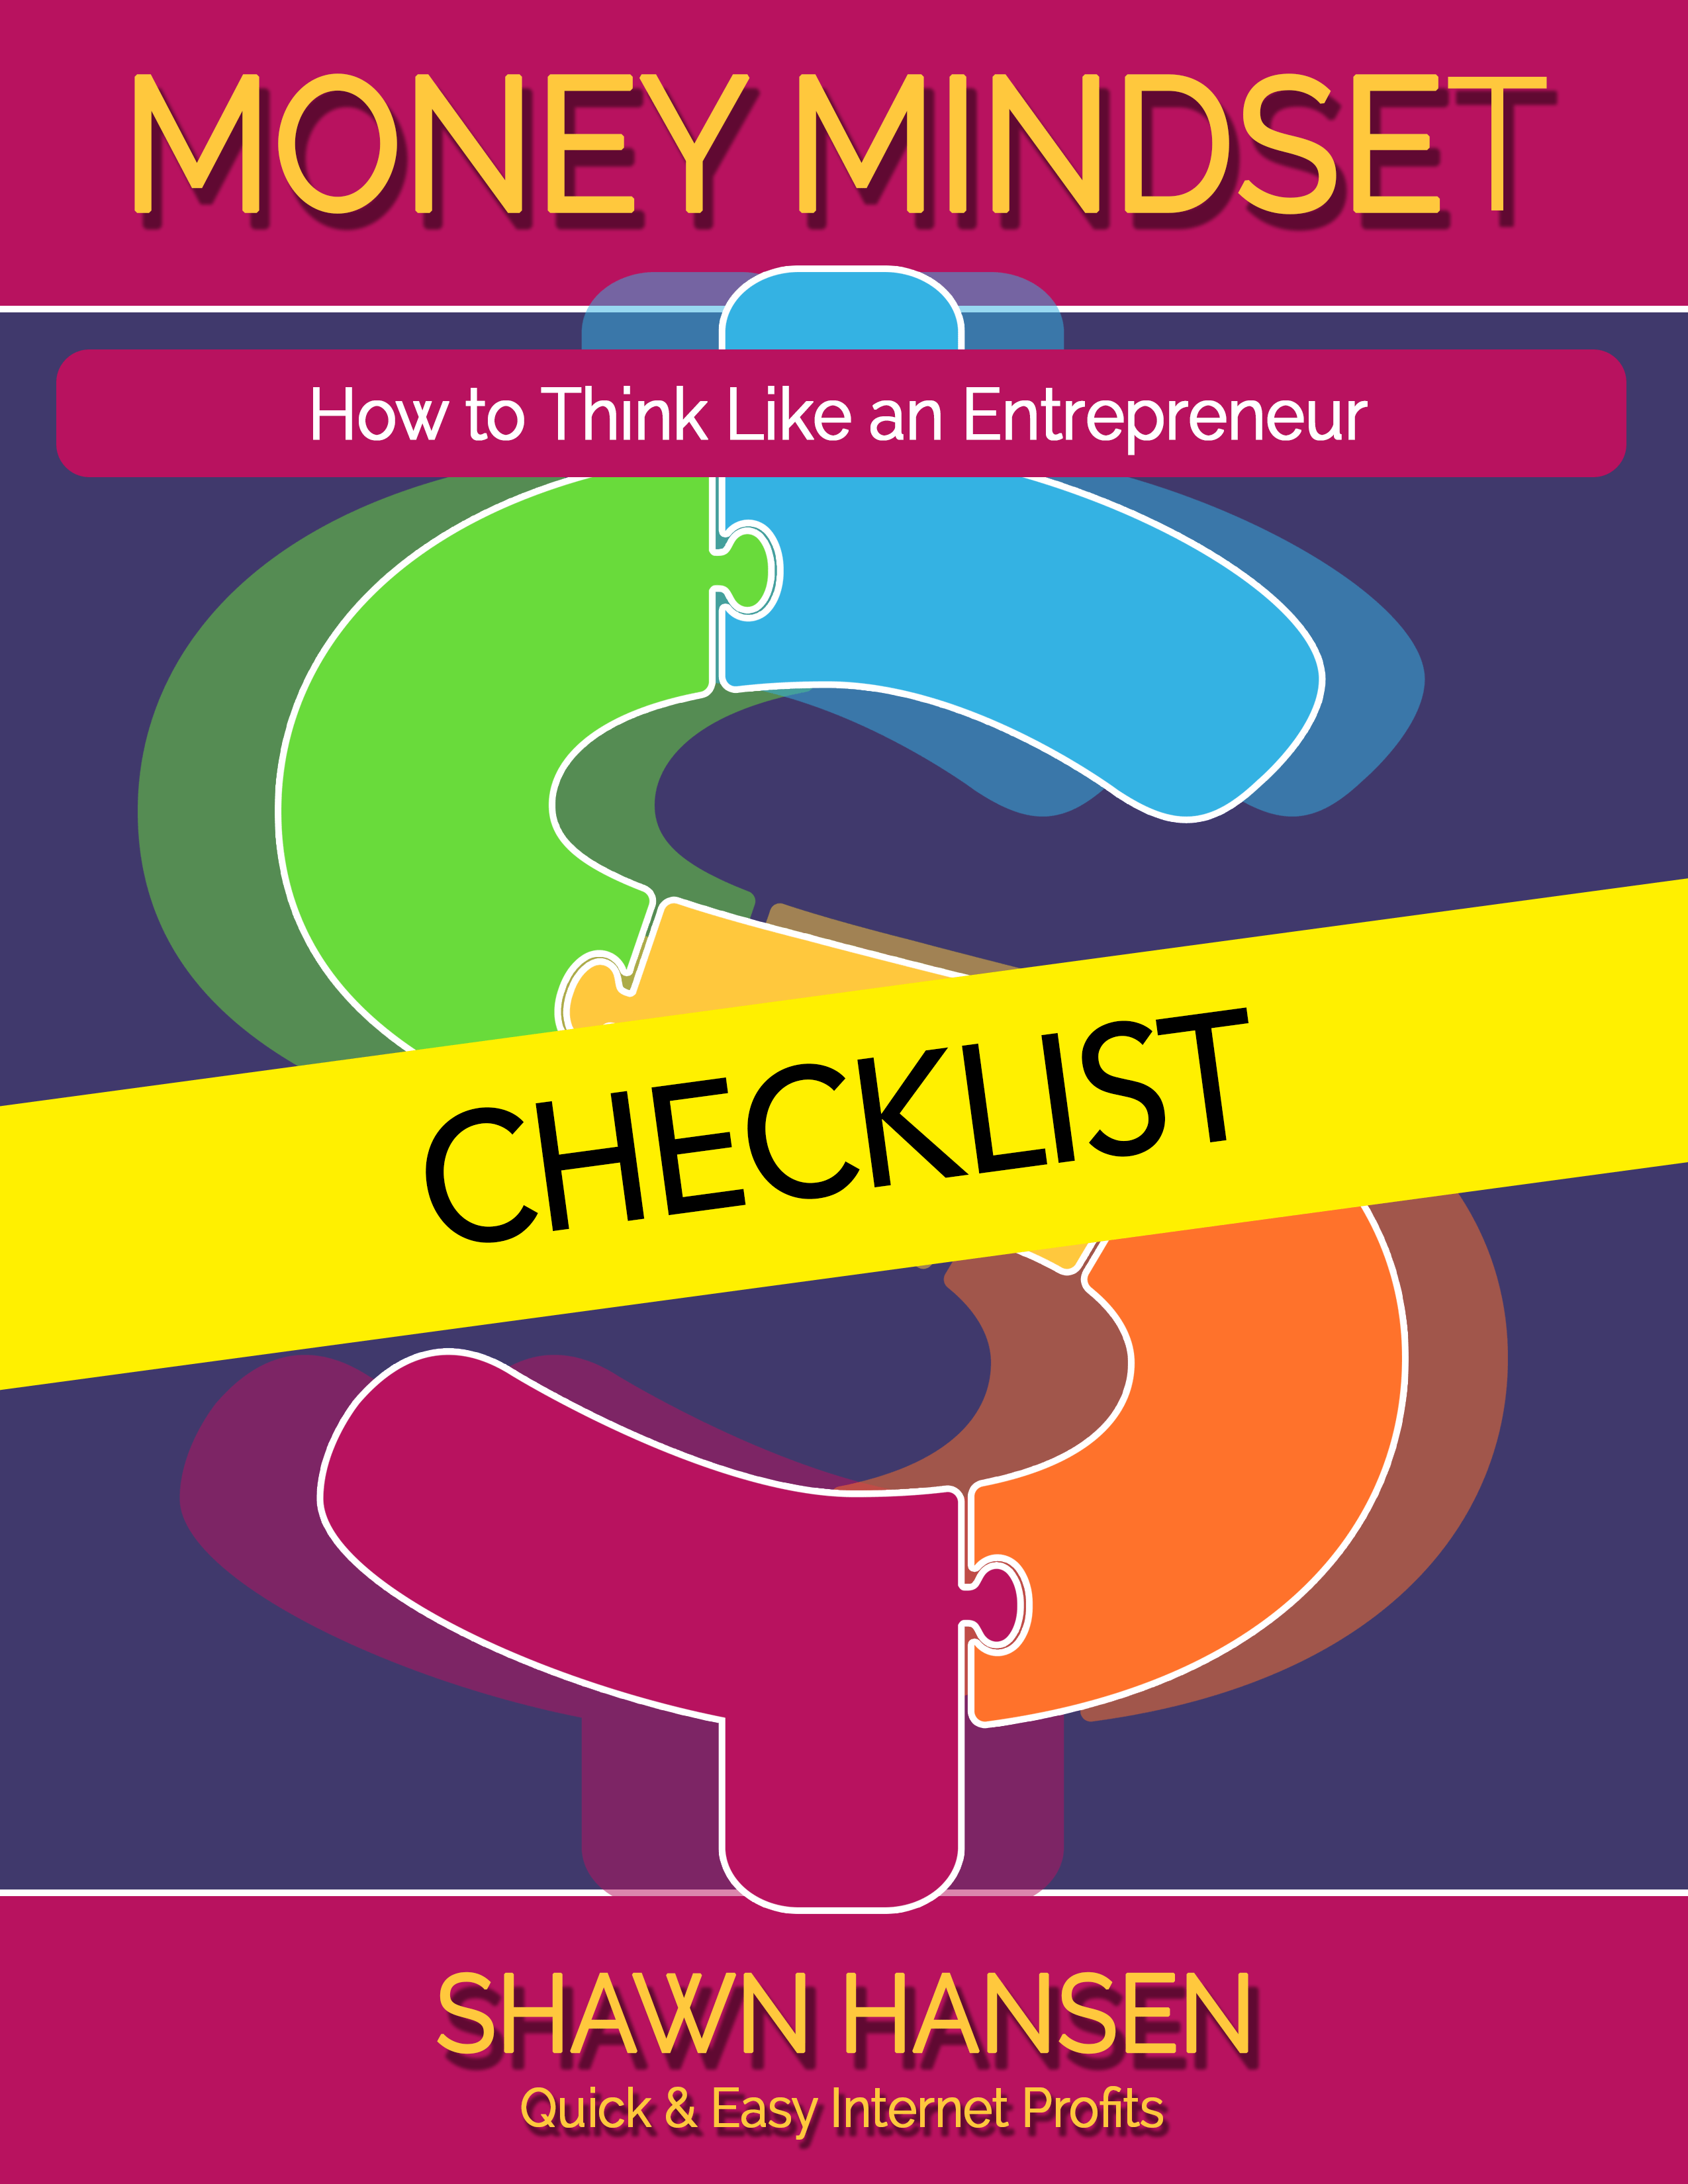 Money Mindset - How to Think Like an Entrepreneur Checklist by Shawn Hansen